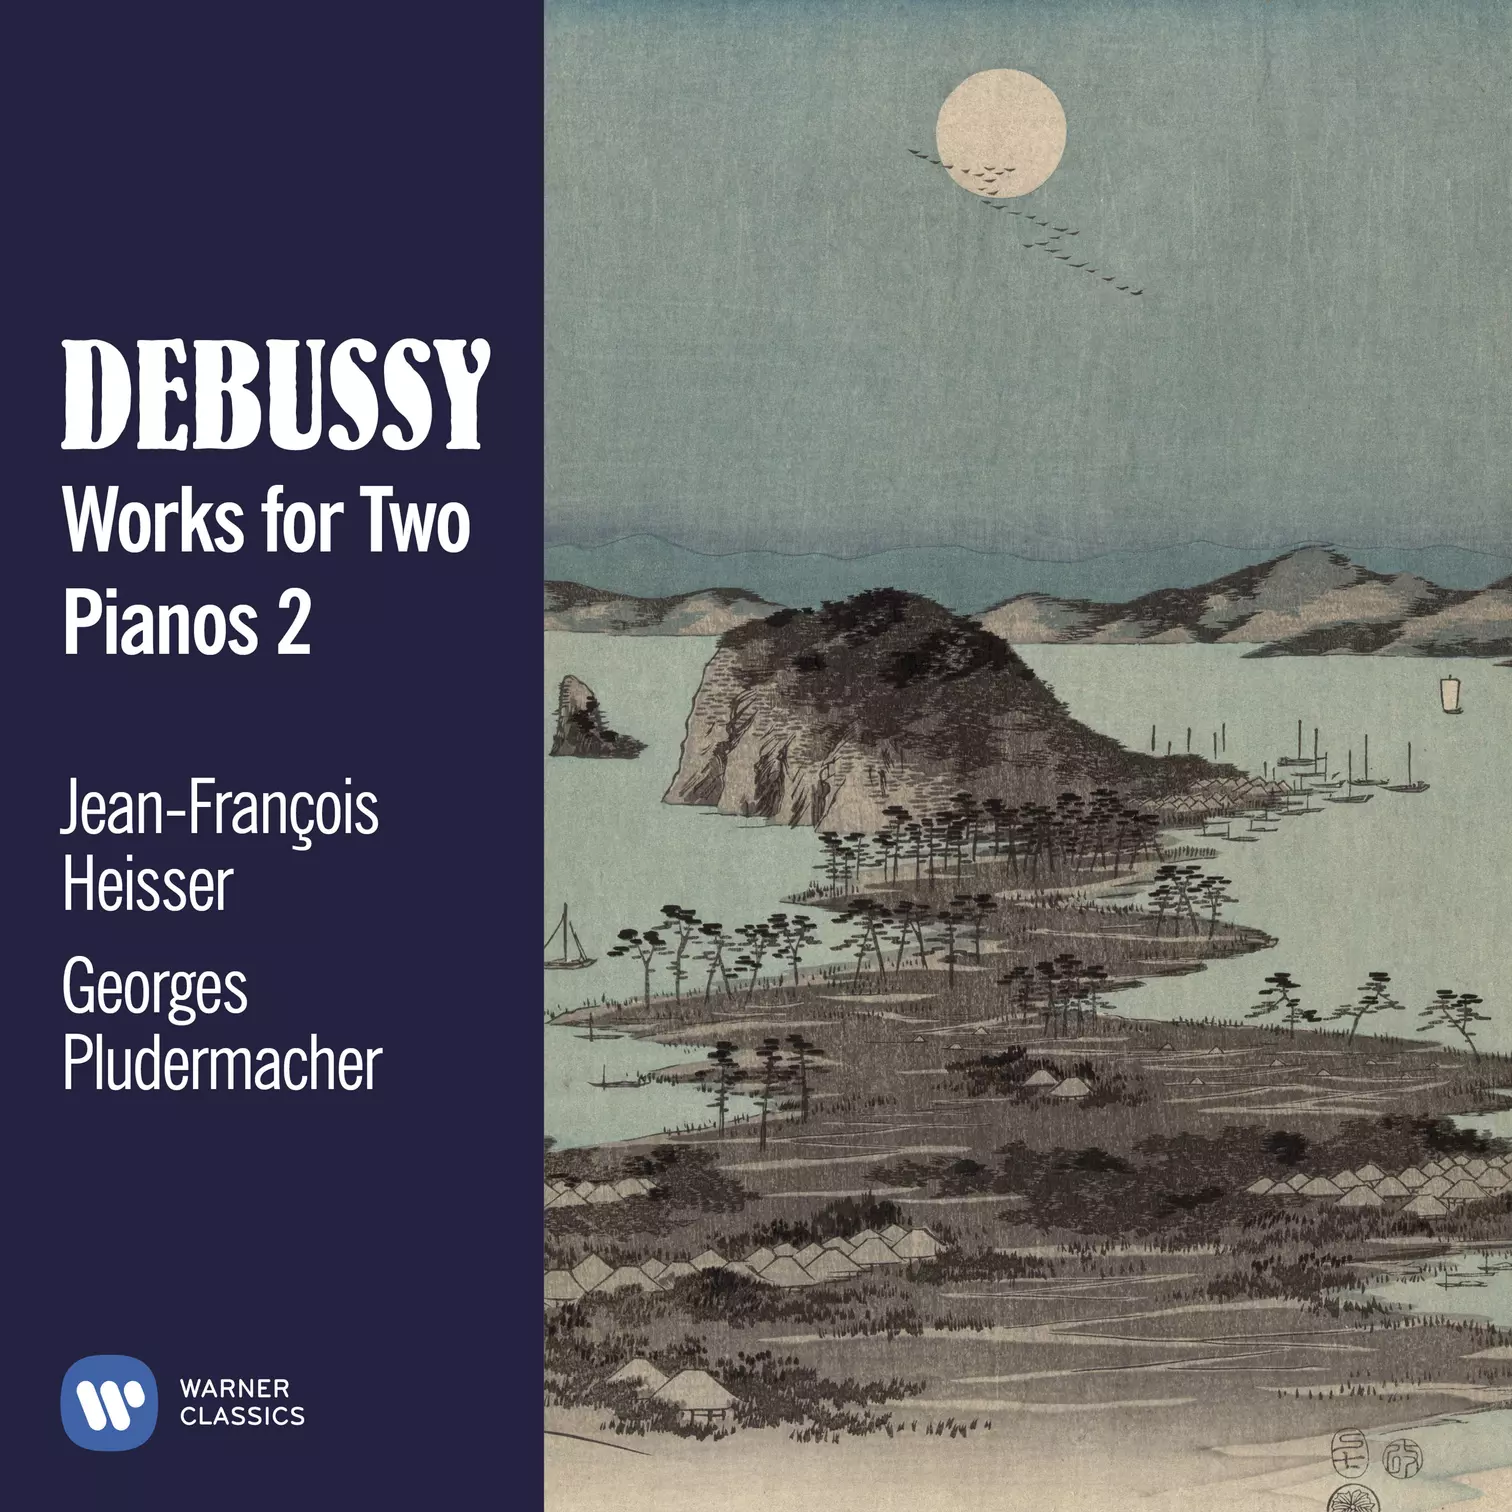 Debussy: Works for Two Pianos 2